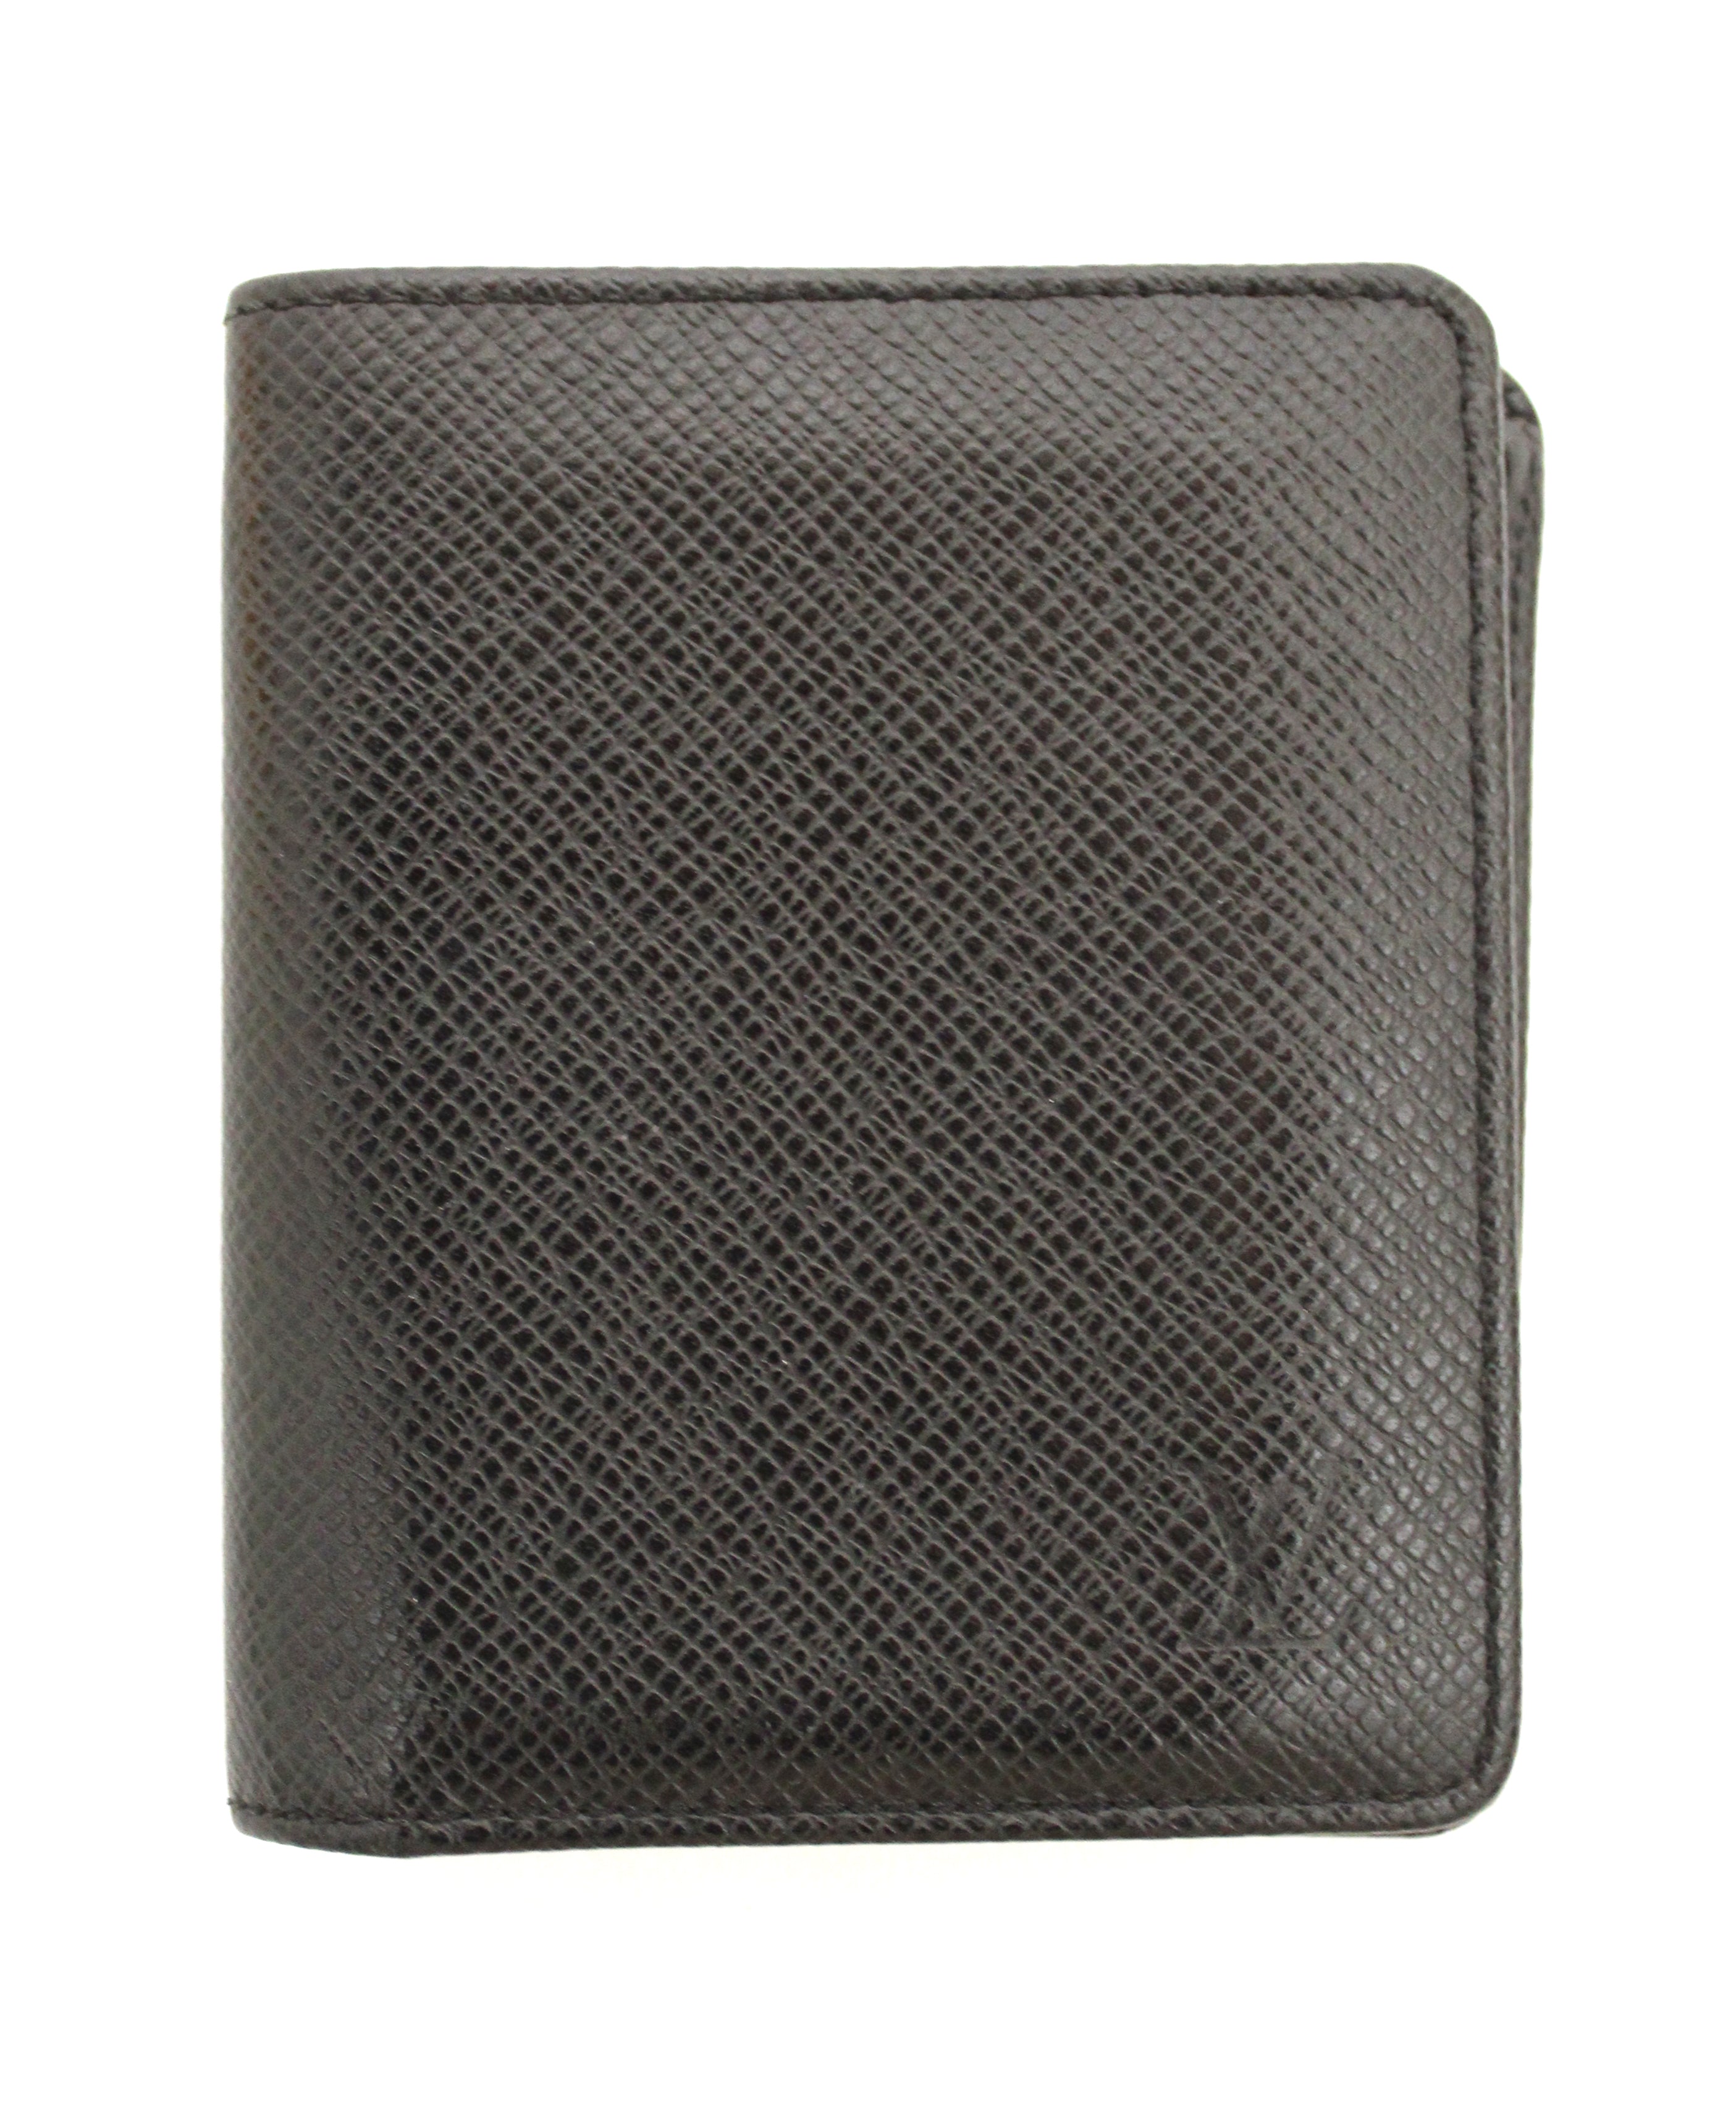 Authentic Louis Vuitton Black Bifold Taiga Leather Compact Wallet